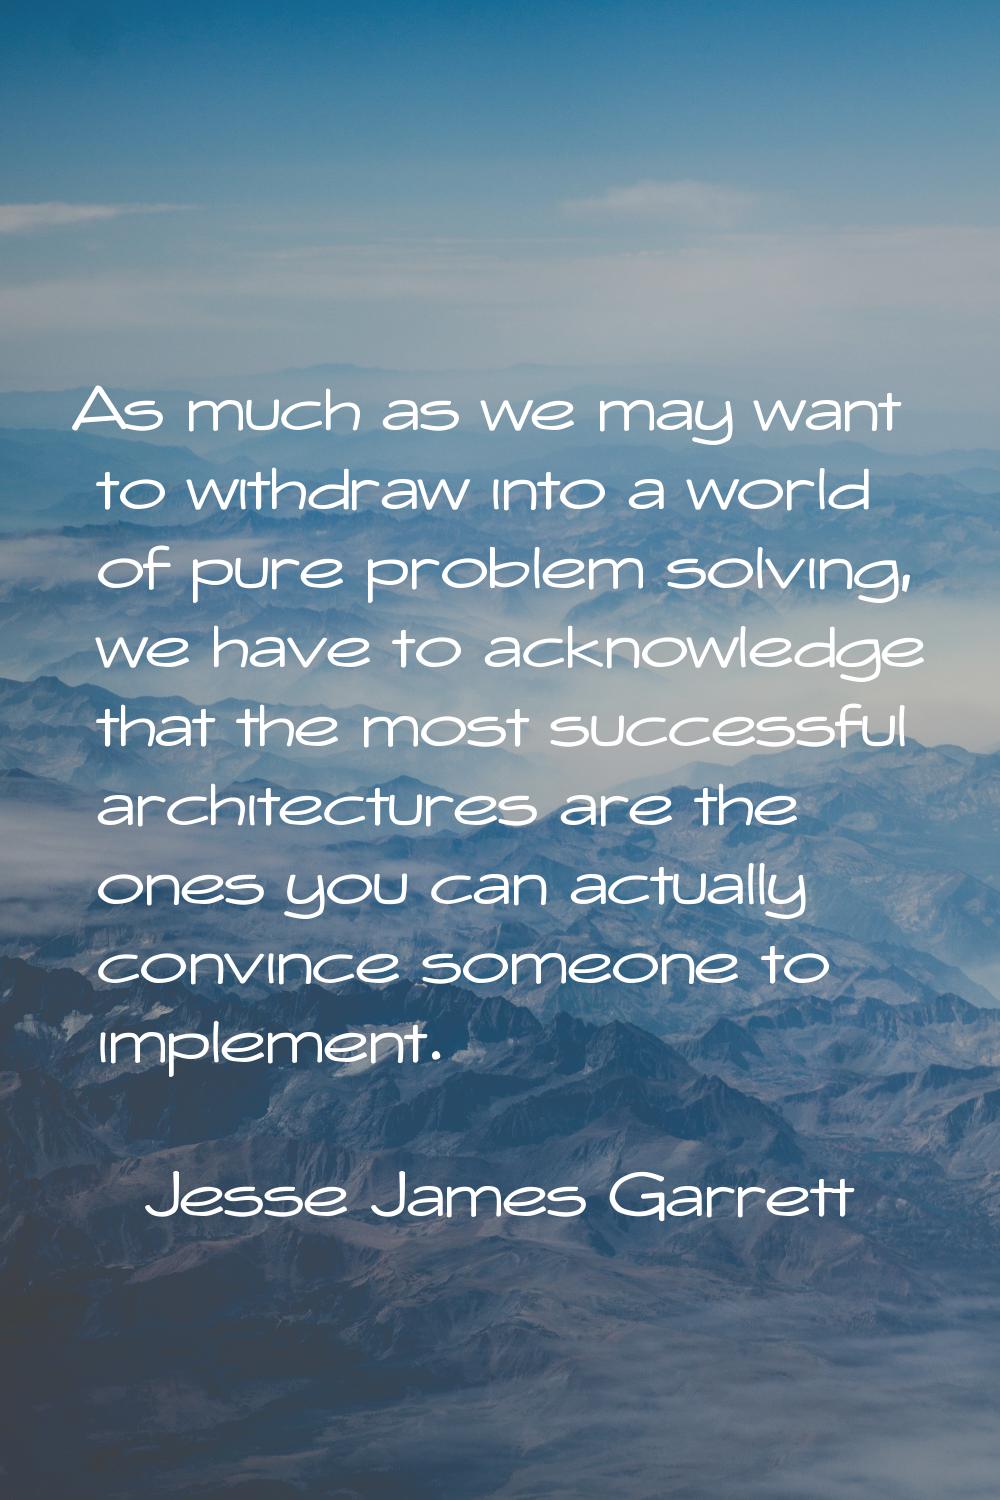 As much as we may want to withdraw into a world of pure problem solving, we have to acknowledge tha